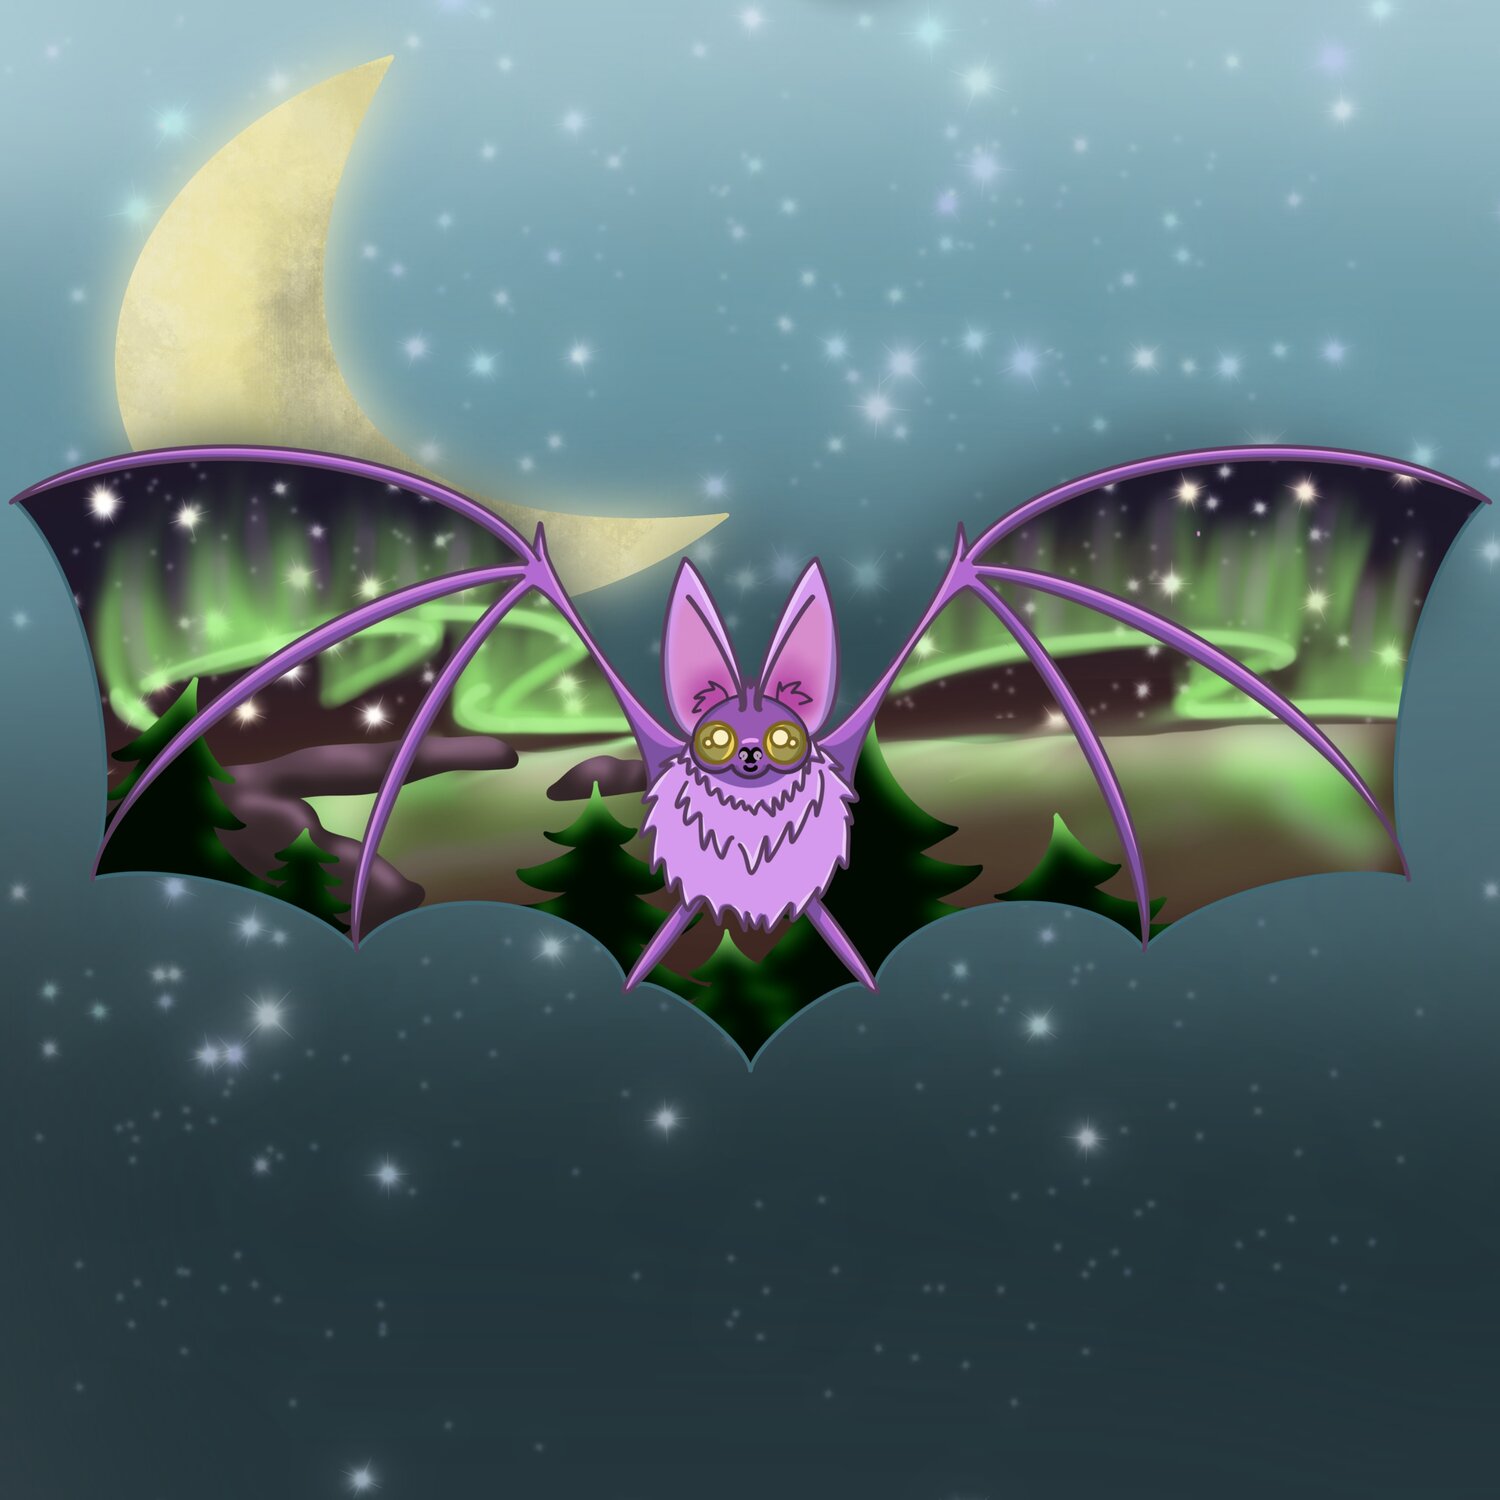 digital artwork showing a purple bat with the northern lights reflected in its wings